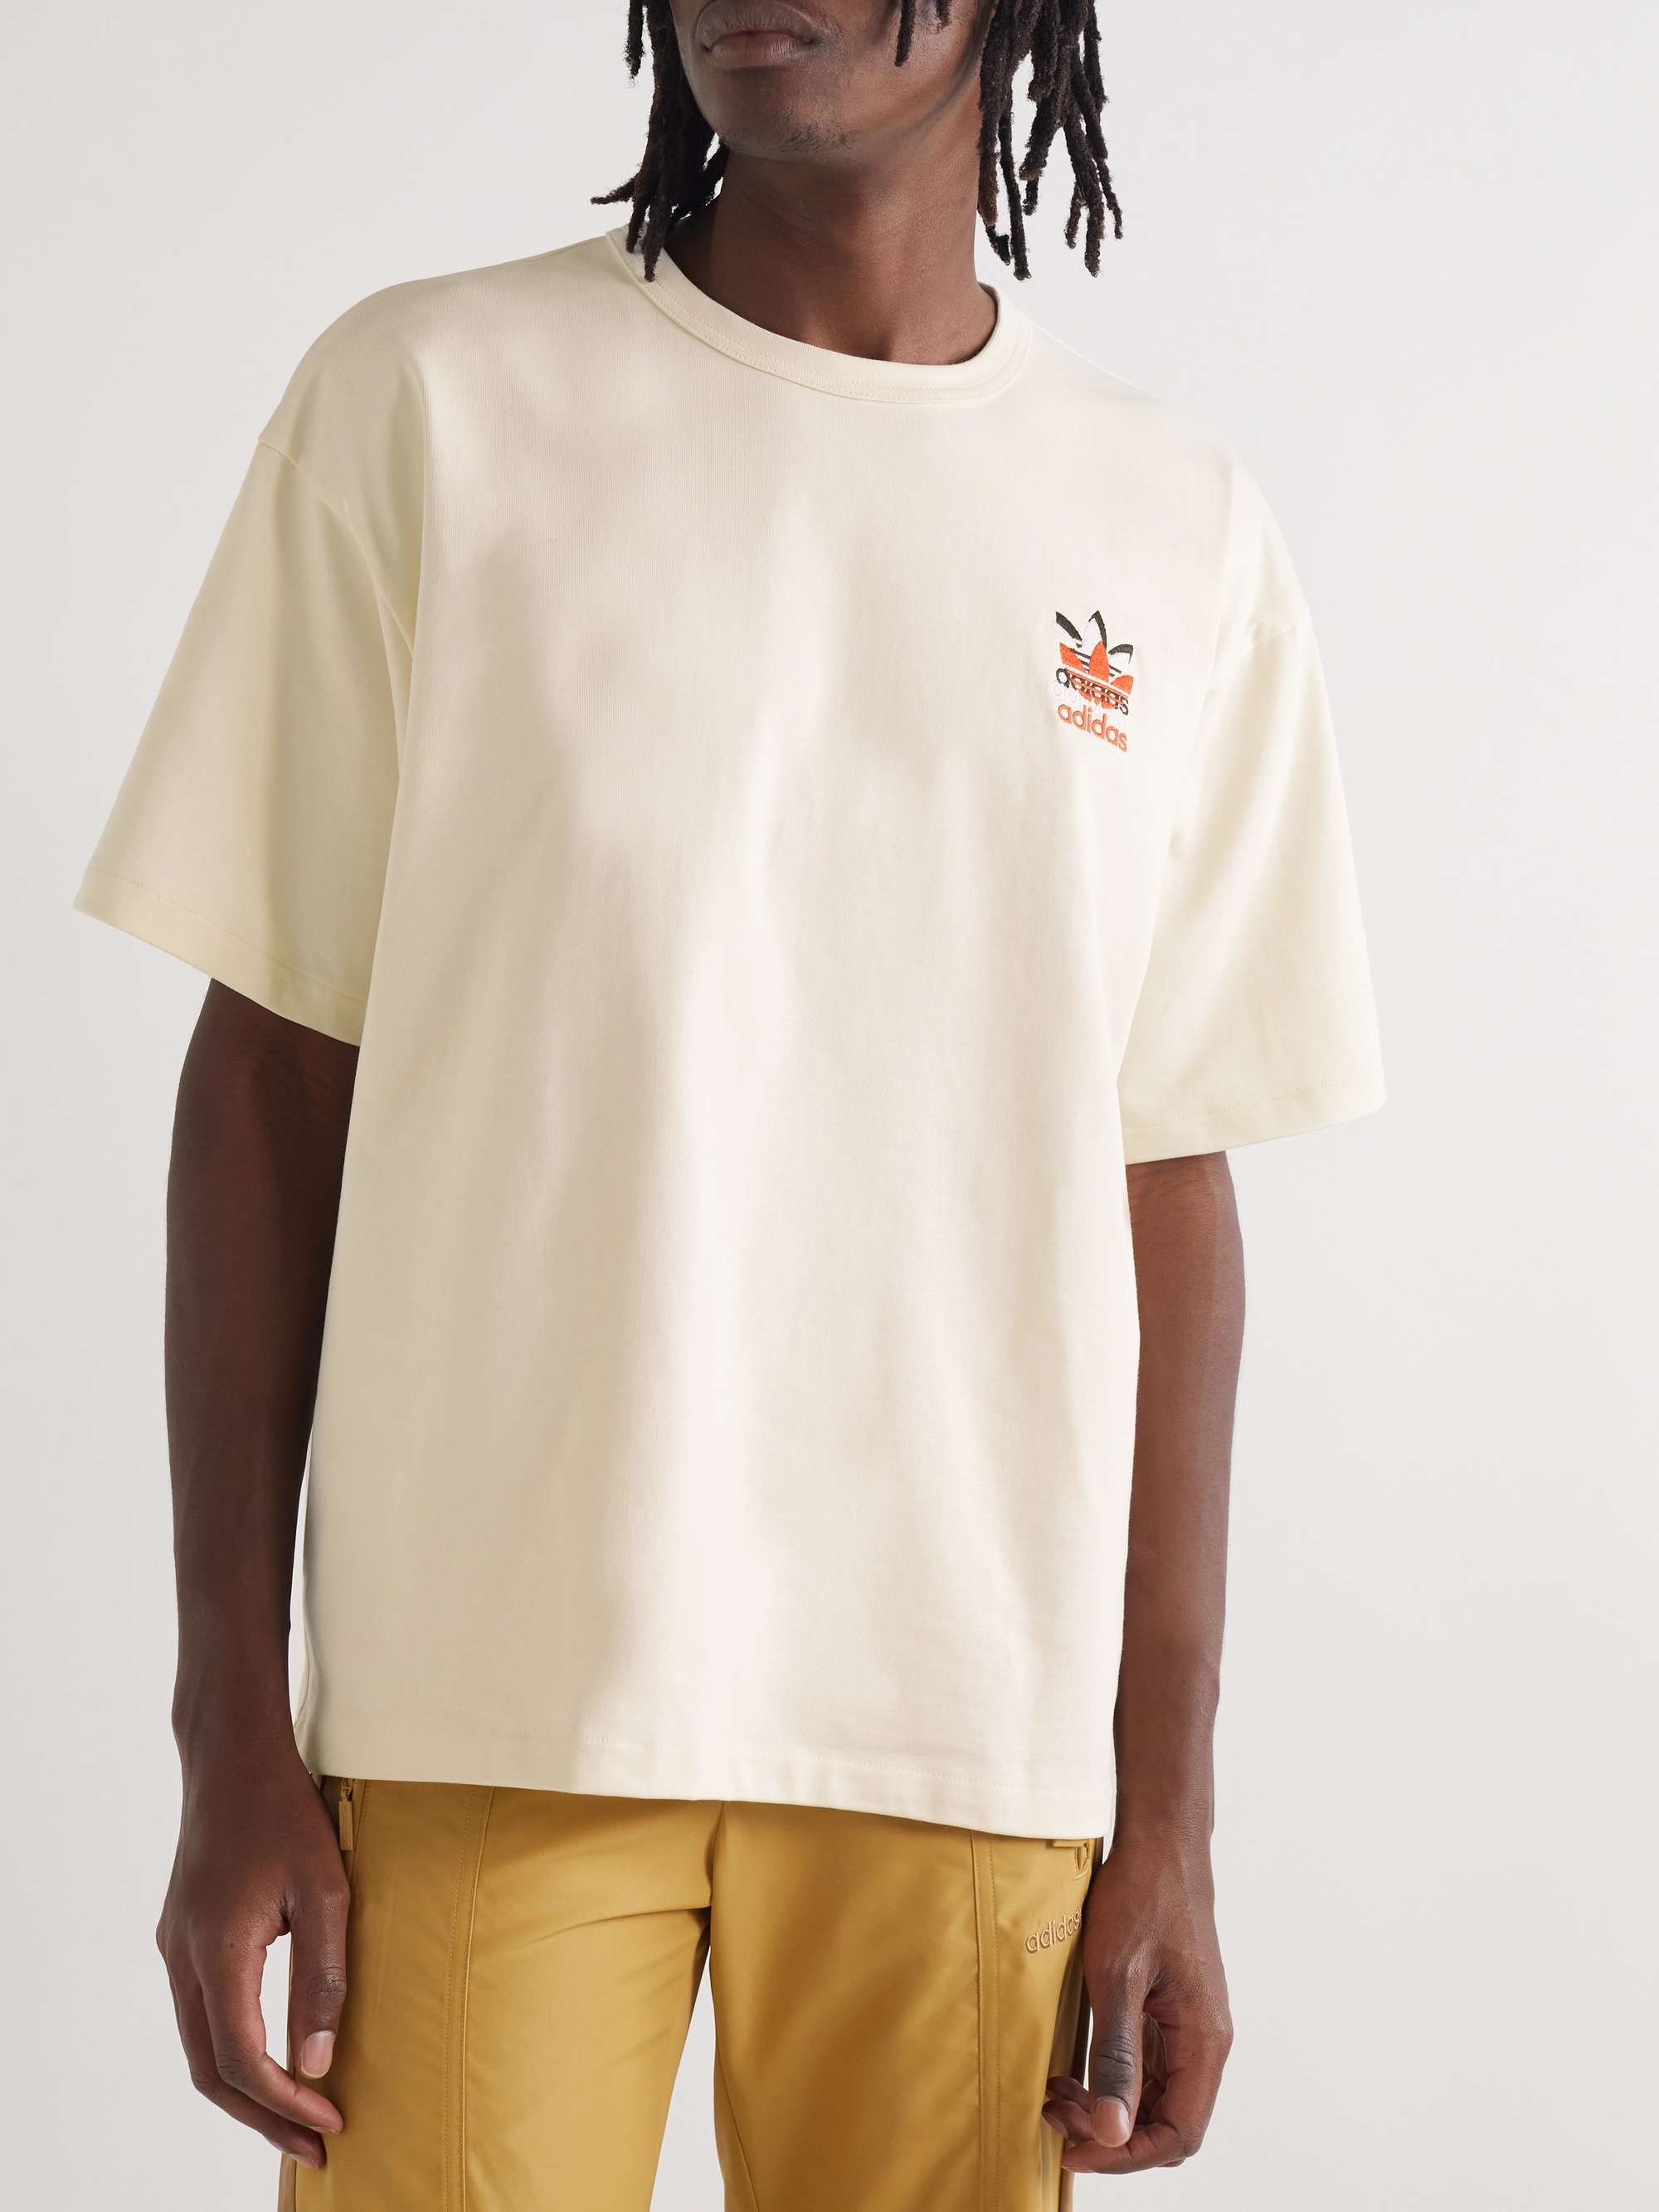 ADIDAS CONSORTIUM + Midwest Kids Logo-Embroidered Cotton-Jersey T-Shirt